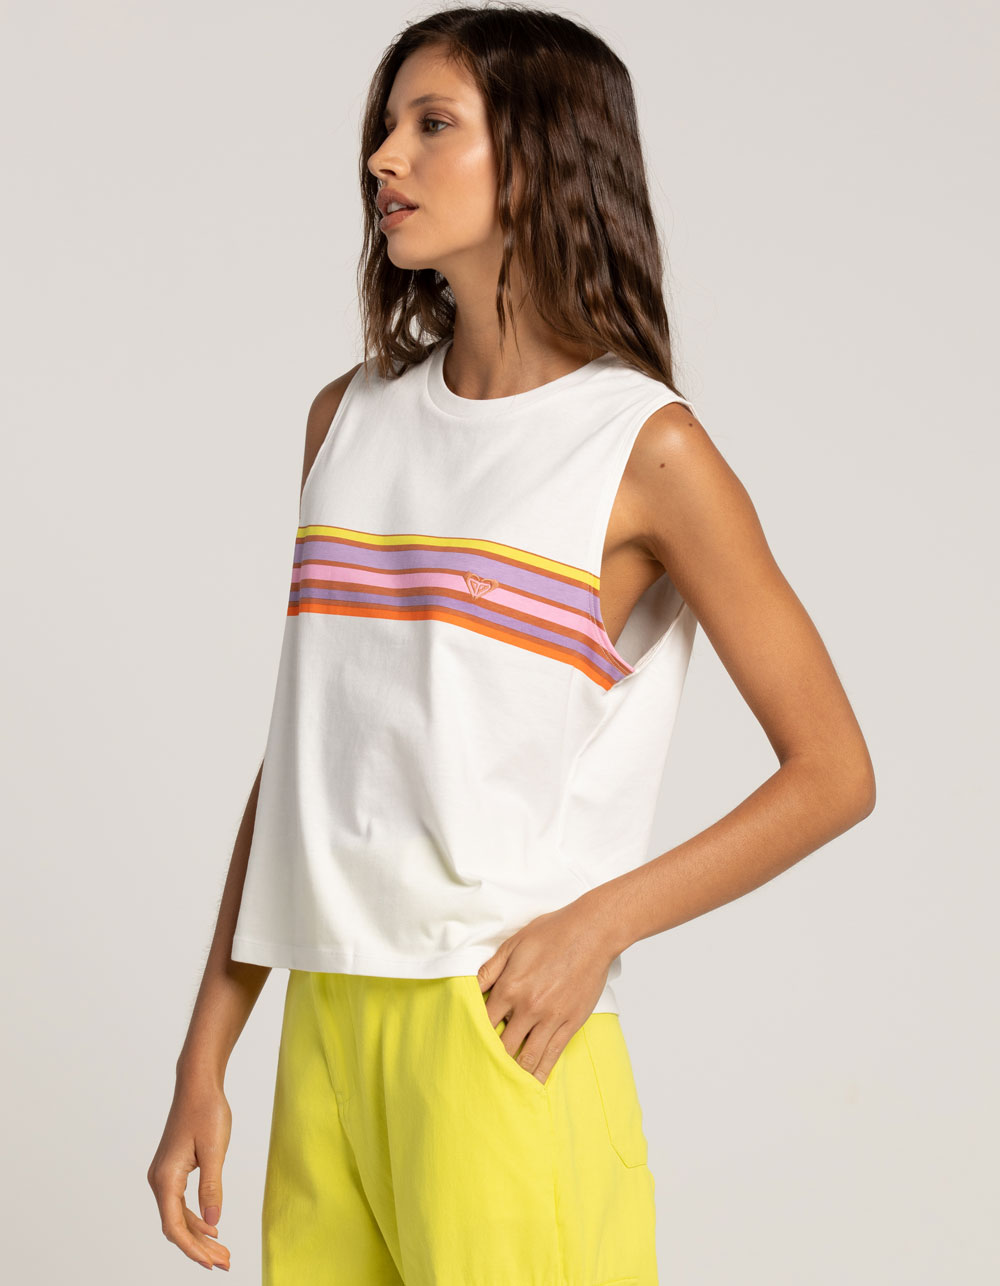 Muscle Kate Womens Surf Bosworth | Tee - Kate x Tillys ROXY WHITE Kind